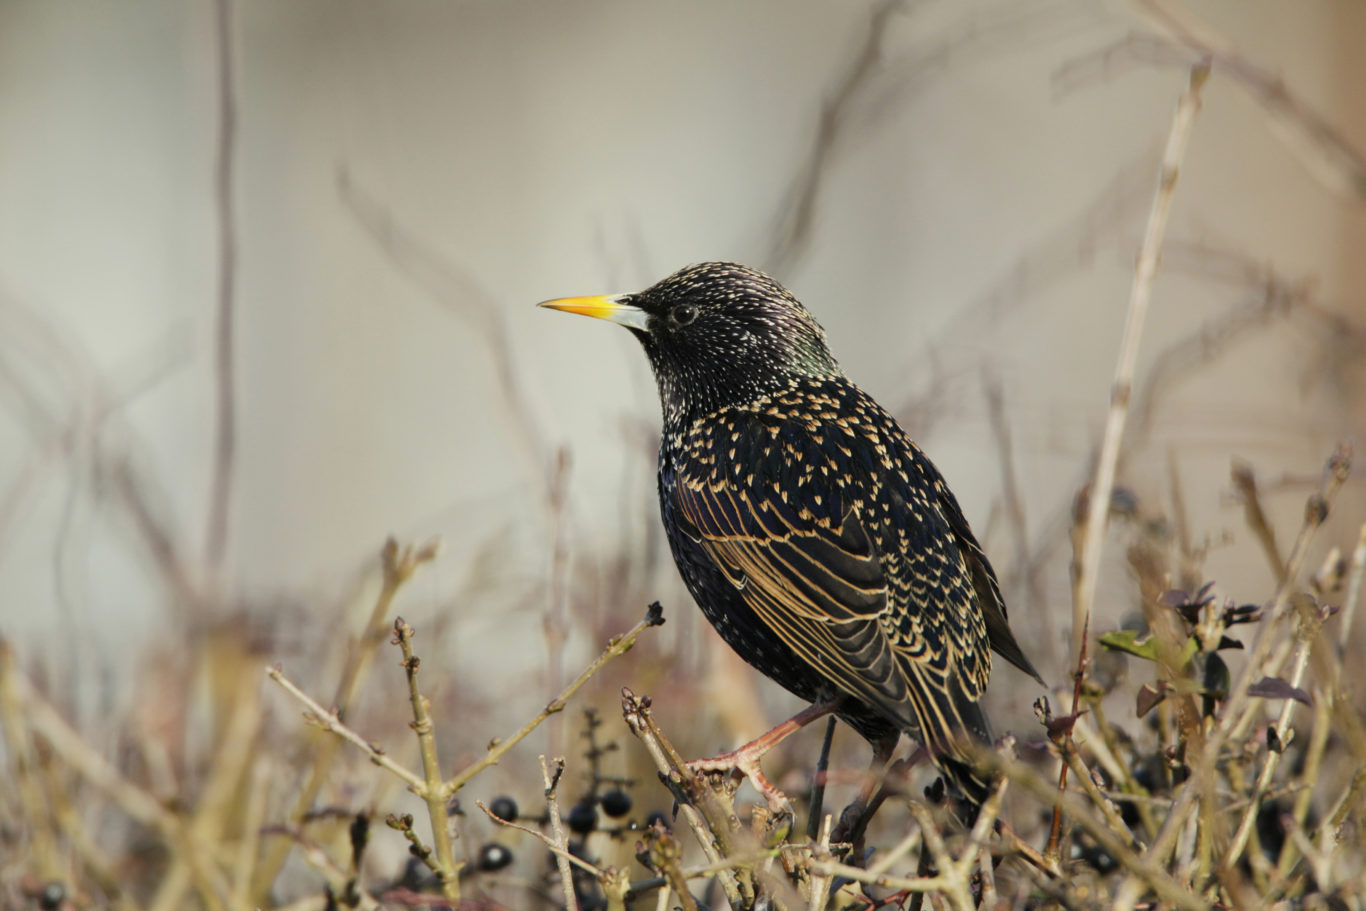 Male starling